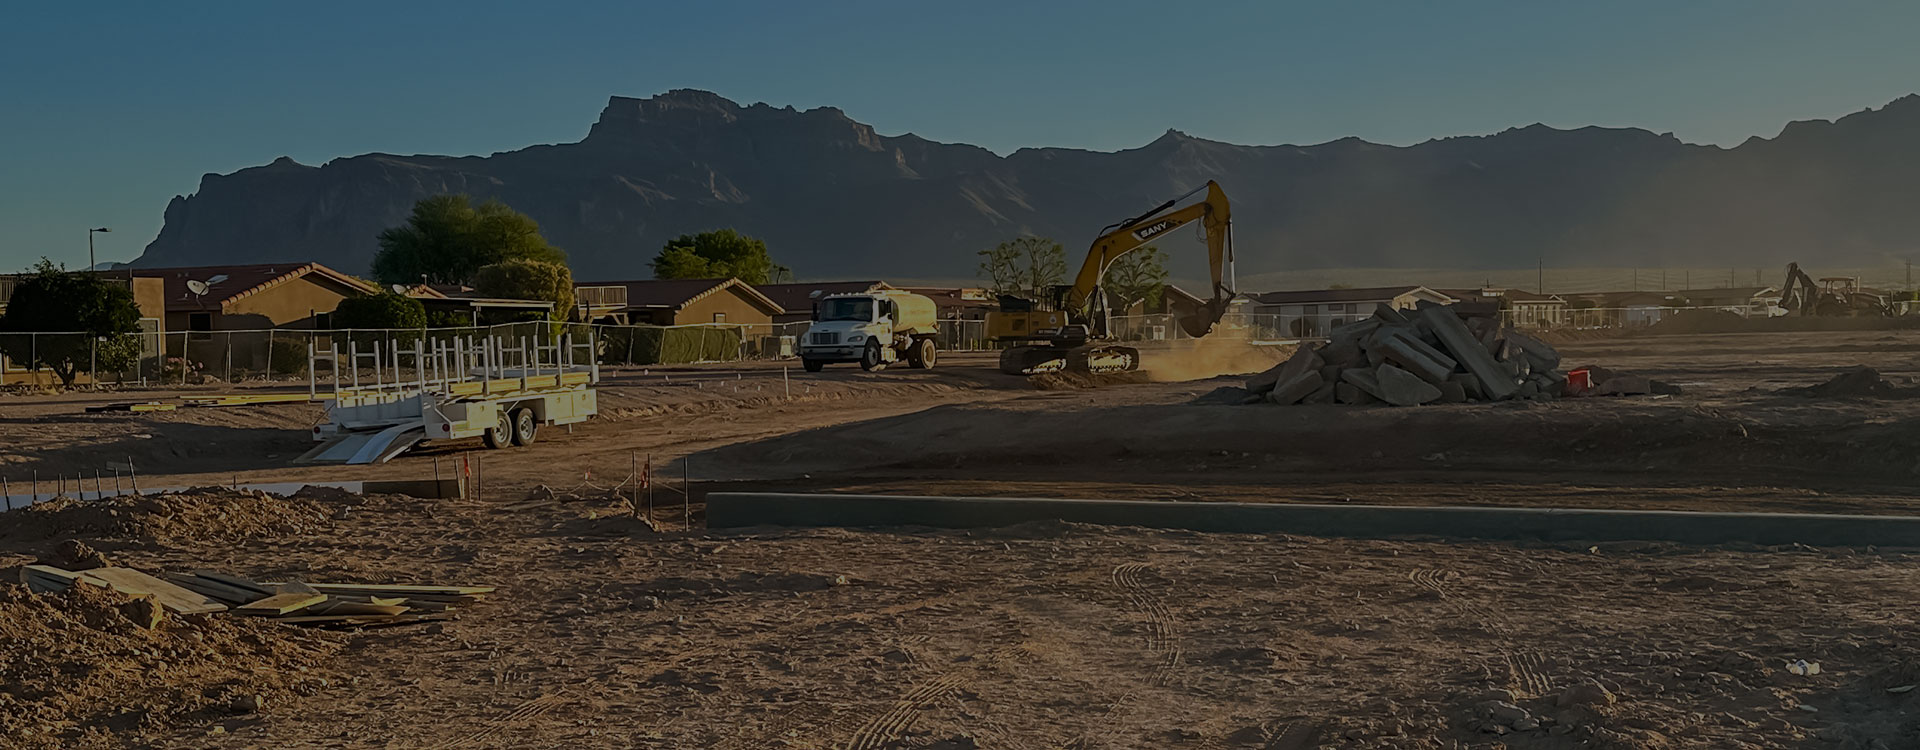 A construction site in the desert with mountains in the background.